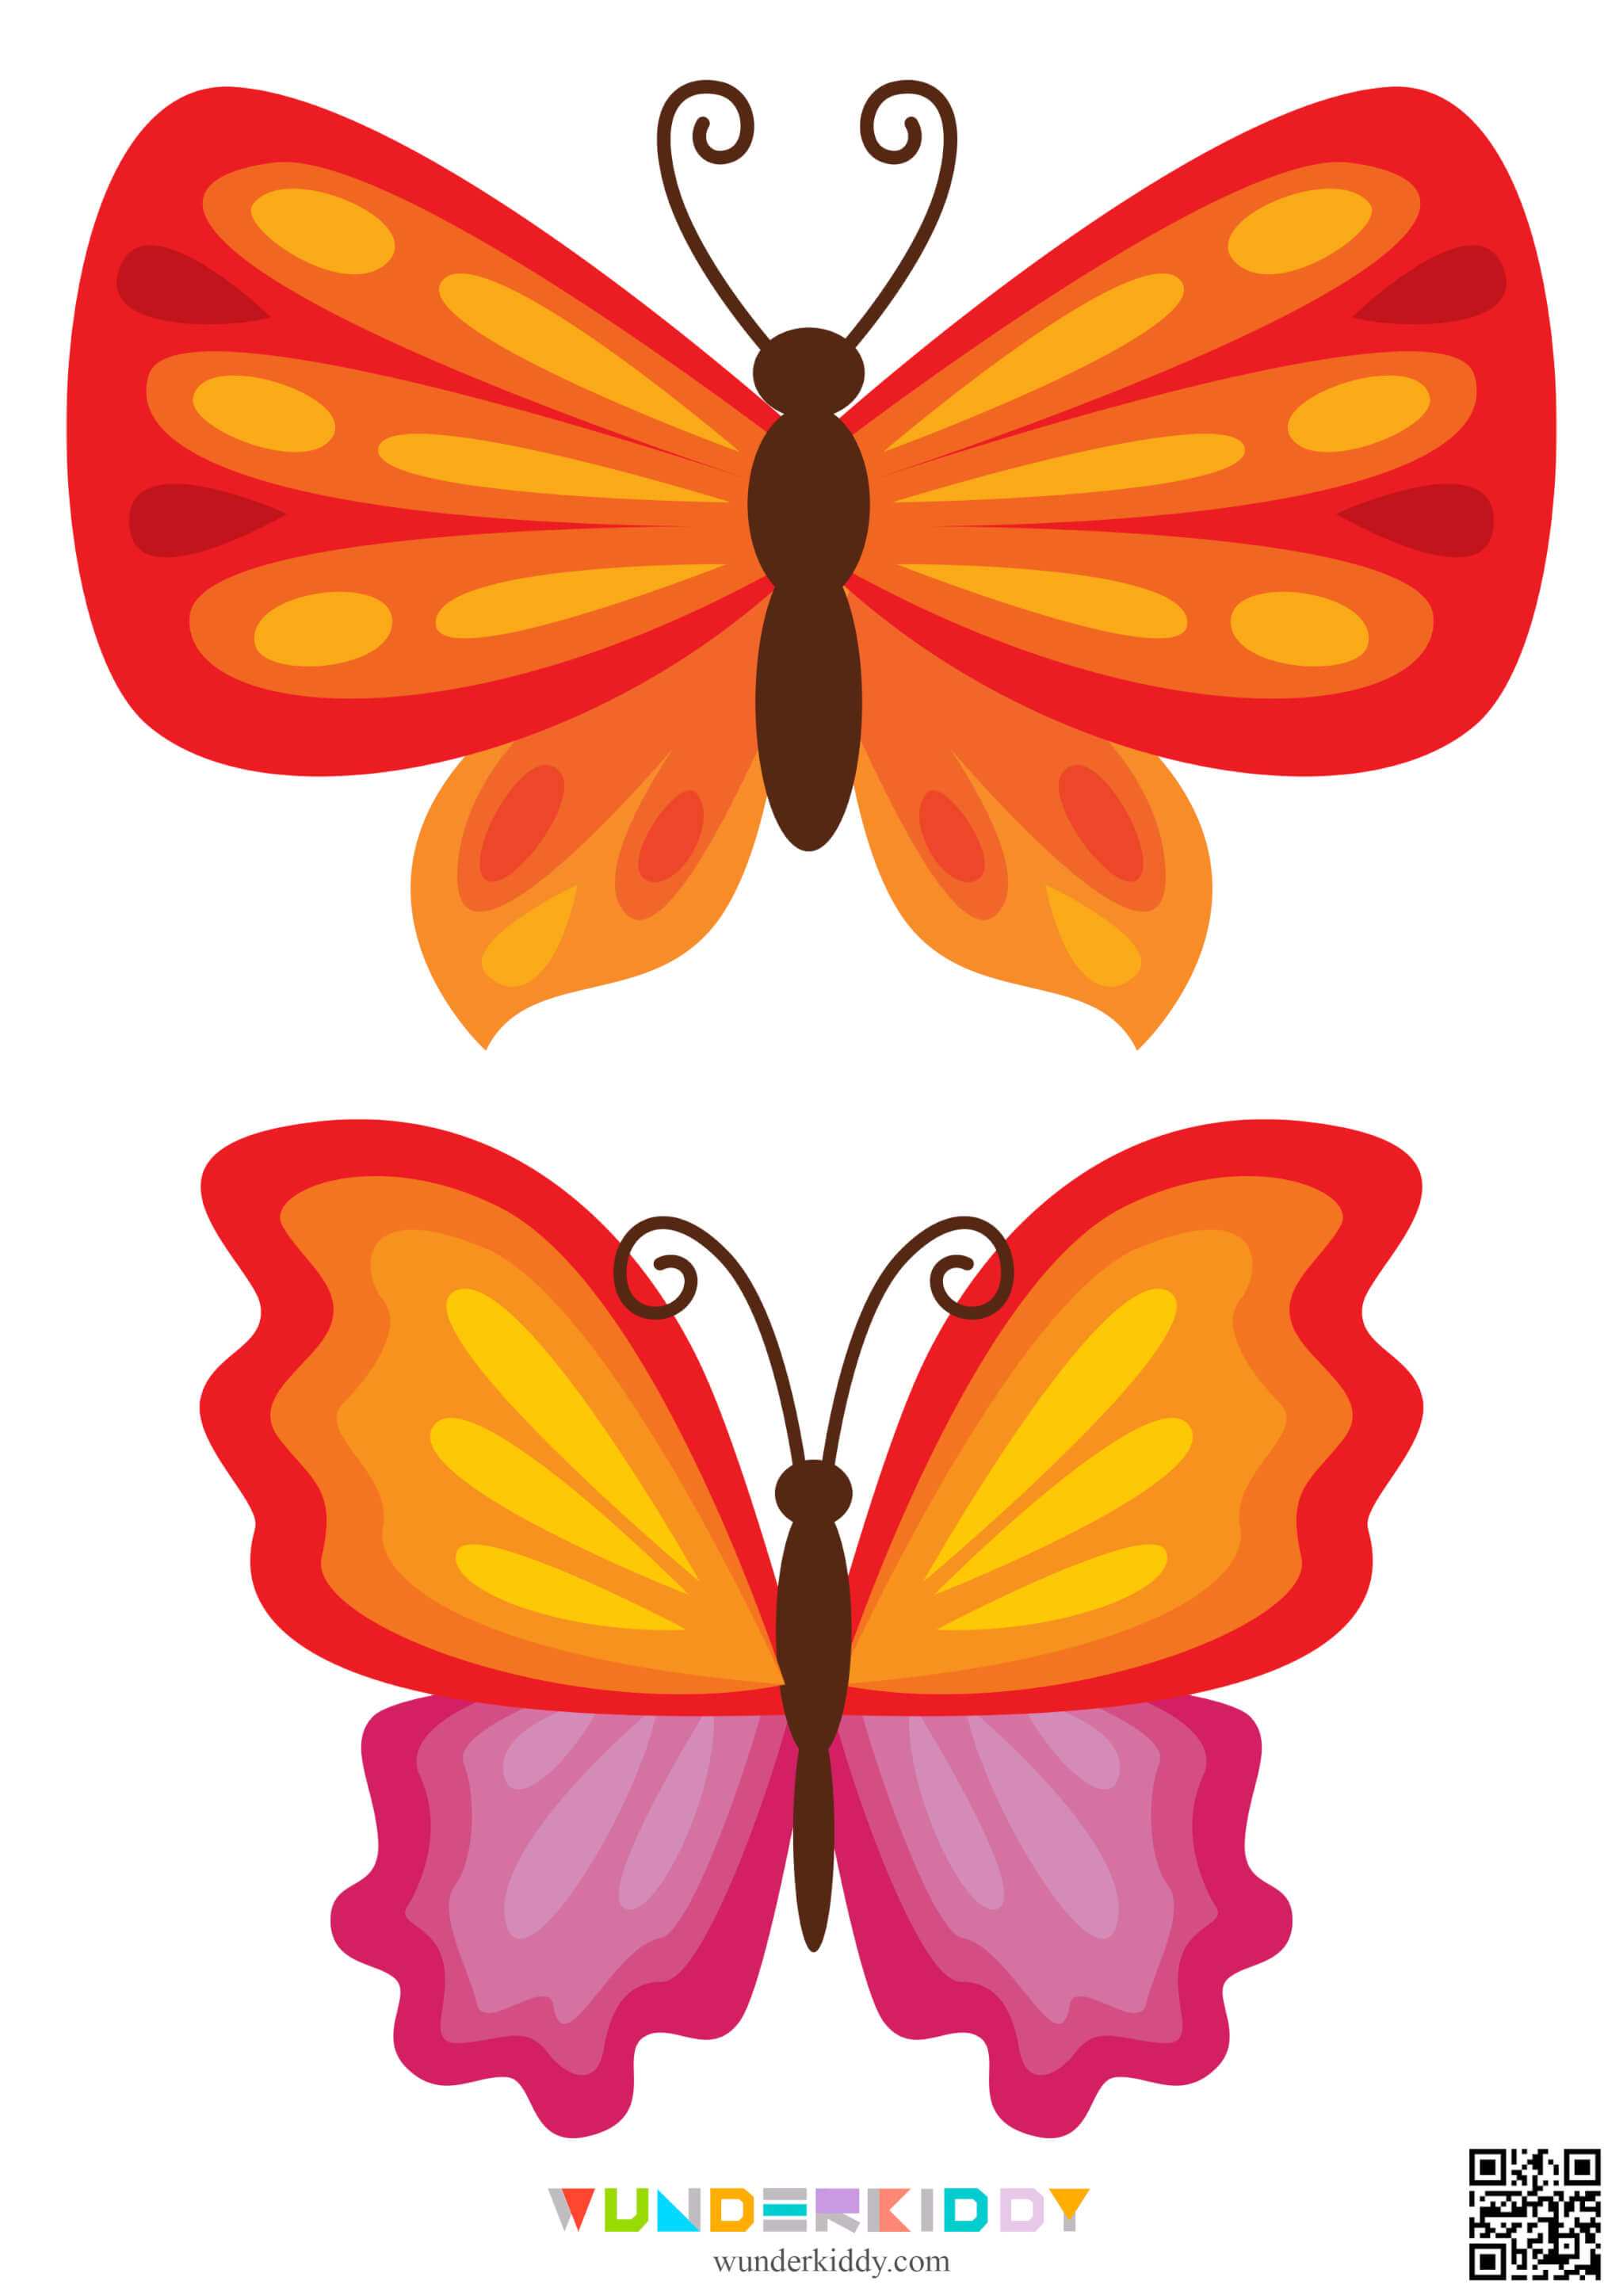 Free Printable Butterfly Templates - Image 4